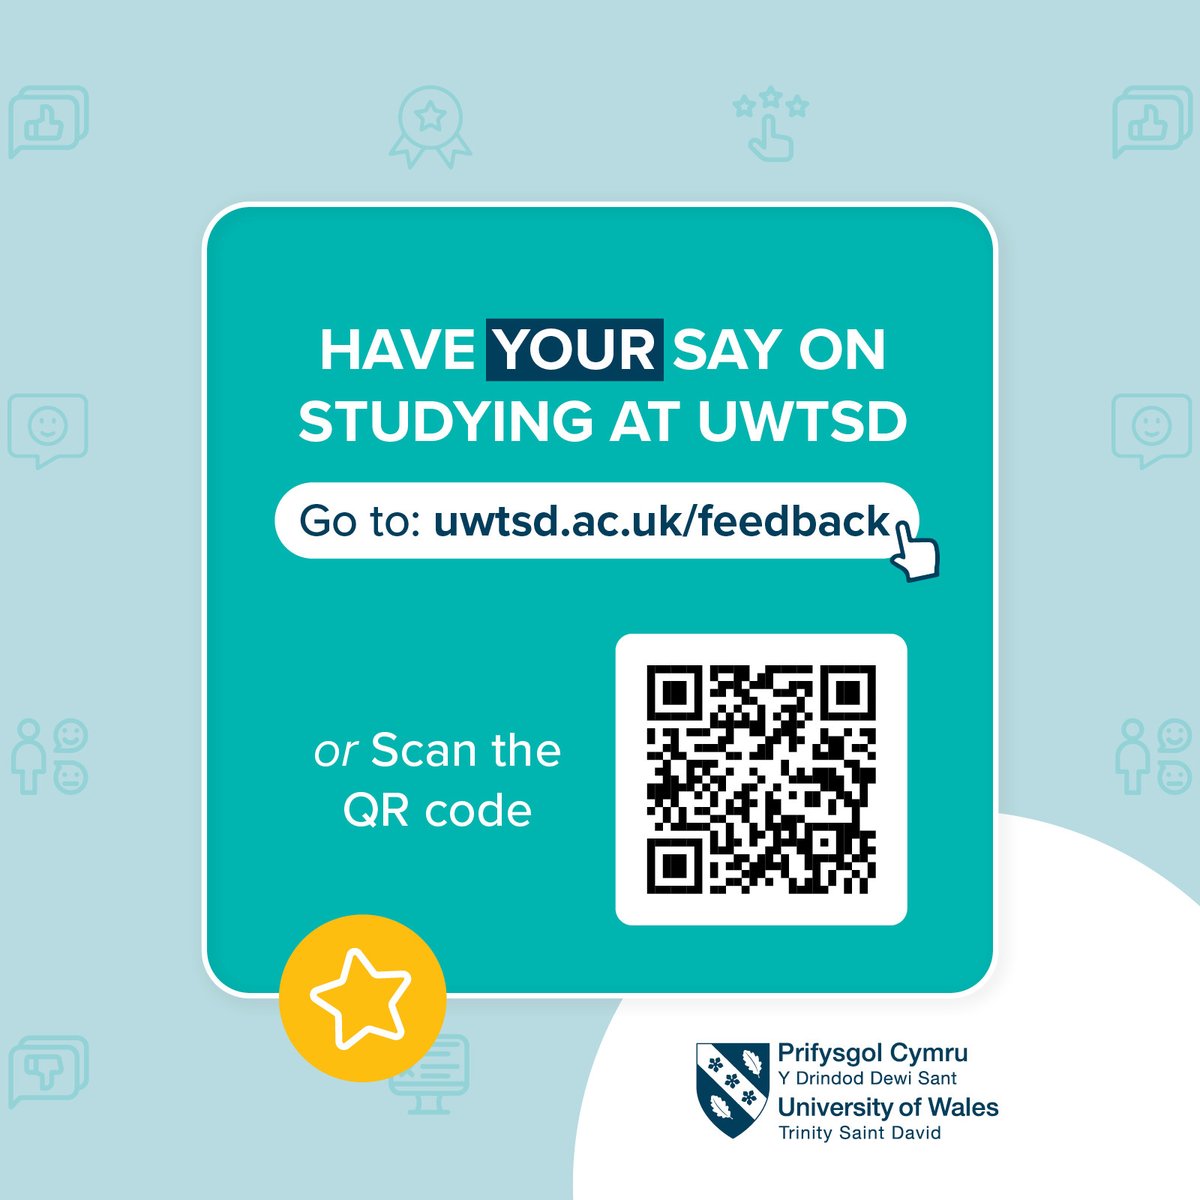 🎓 Your voice matters! 🗣️ Scan the QR code and share your thoughts on studying at our university! Let's make our campus experience even better together! 🌟

#StudentVoice #UniFeedback #studentlife